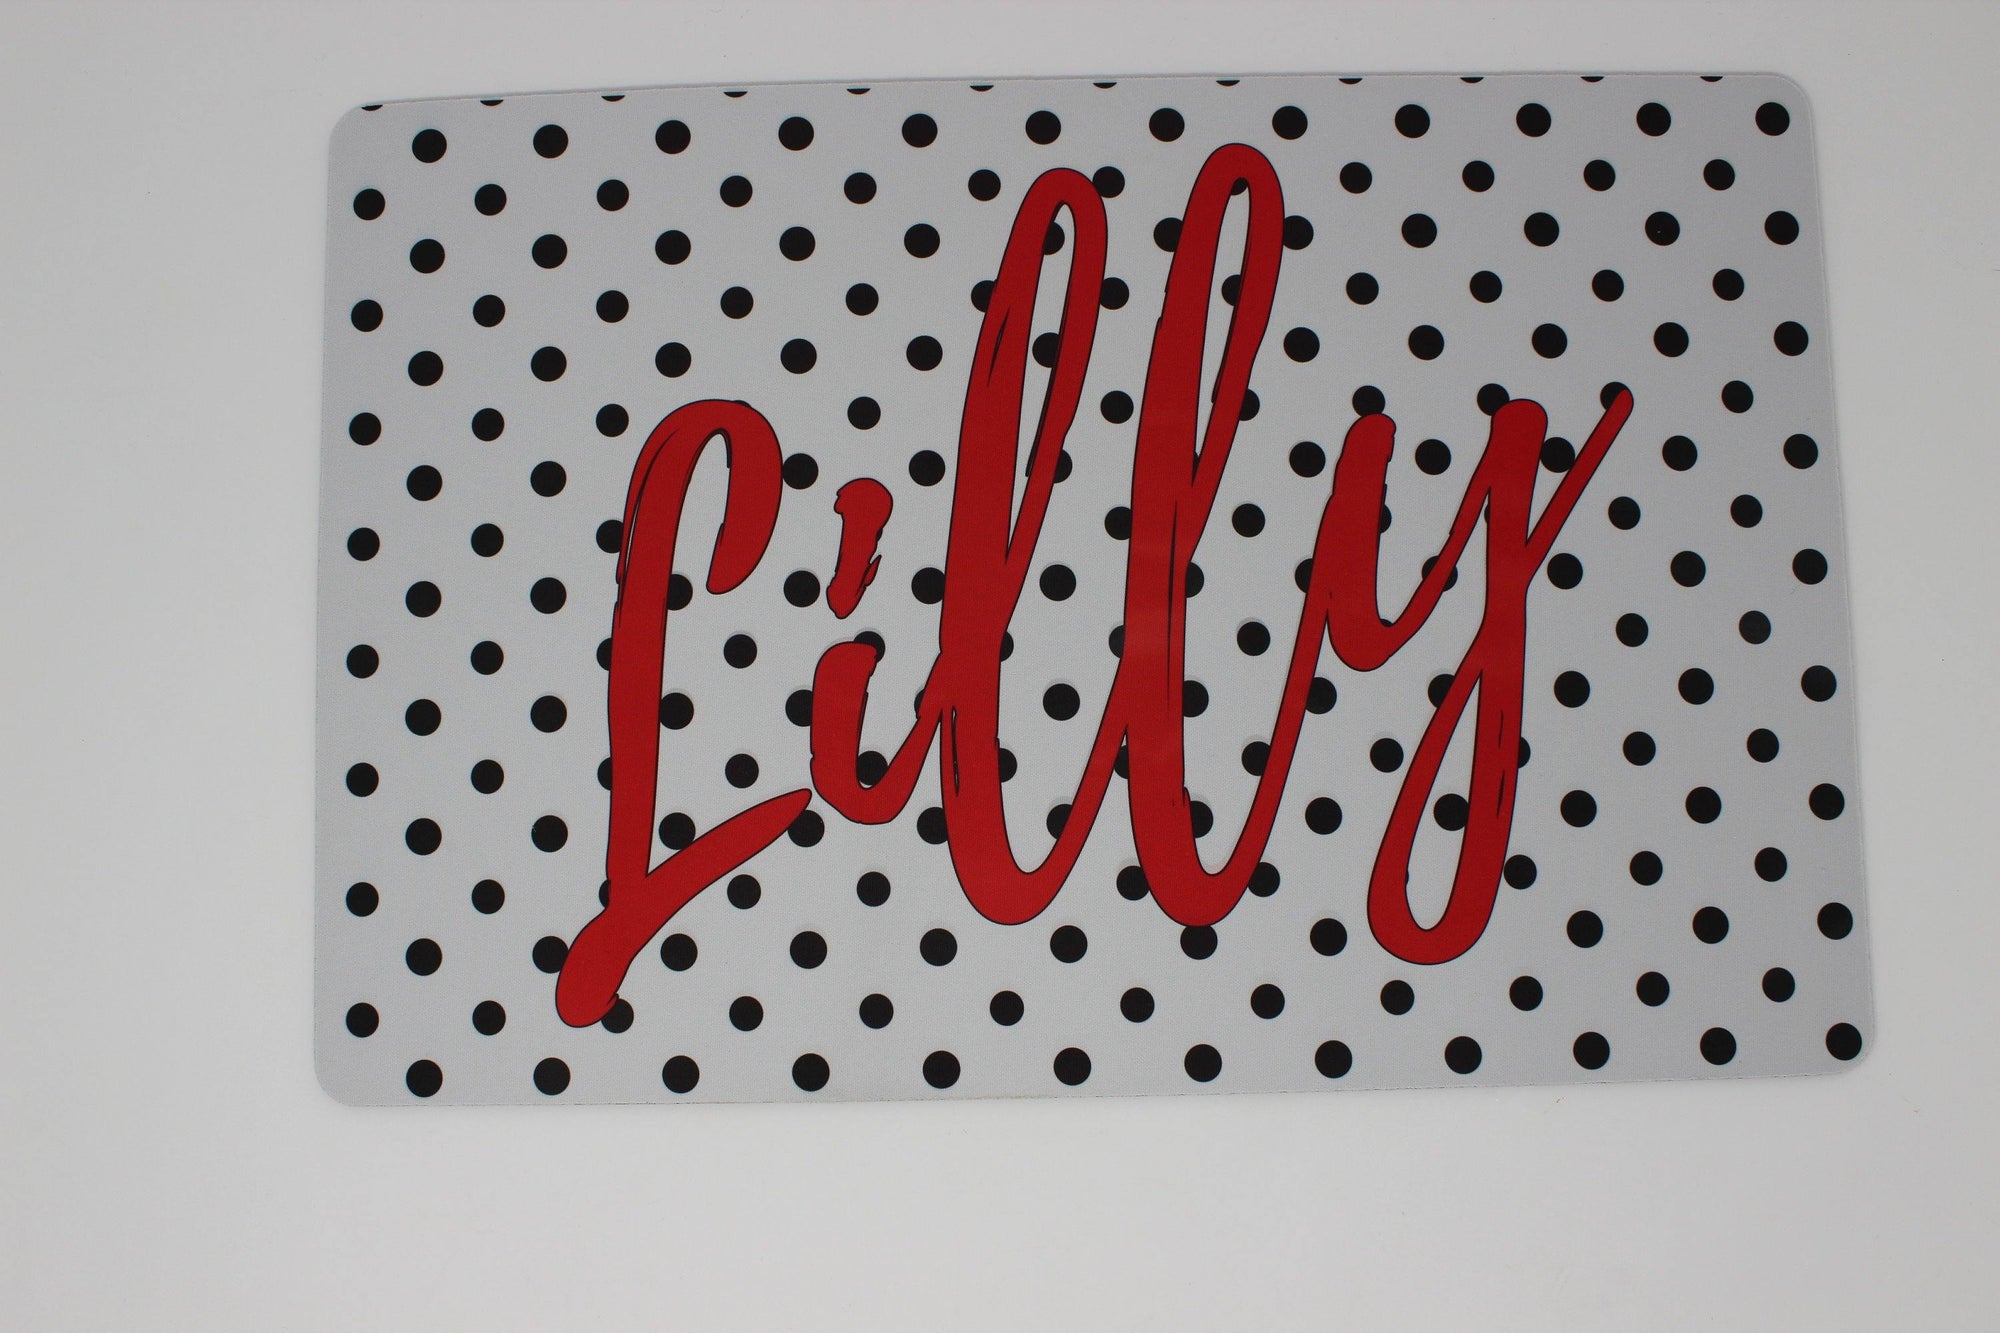 Personalized Pet Placemat | Custom Pet Placemat | Pet Accessories | Red and Black Polka Dot - This & That Solutions - Personalized Pet Placemat | Custom Pet Placemat | Pet Accessories | Red and Black Polka Dot - Personalized Gifts & Custom Home Decor